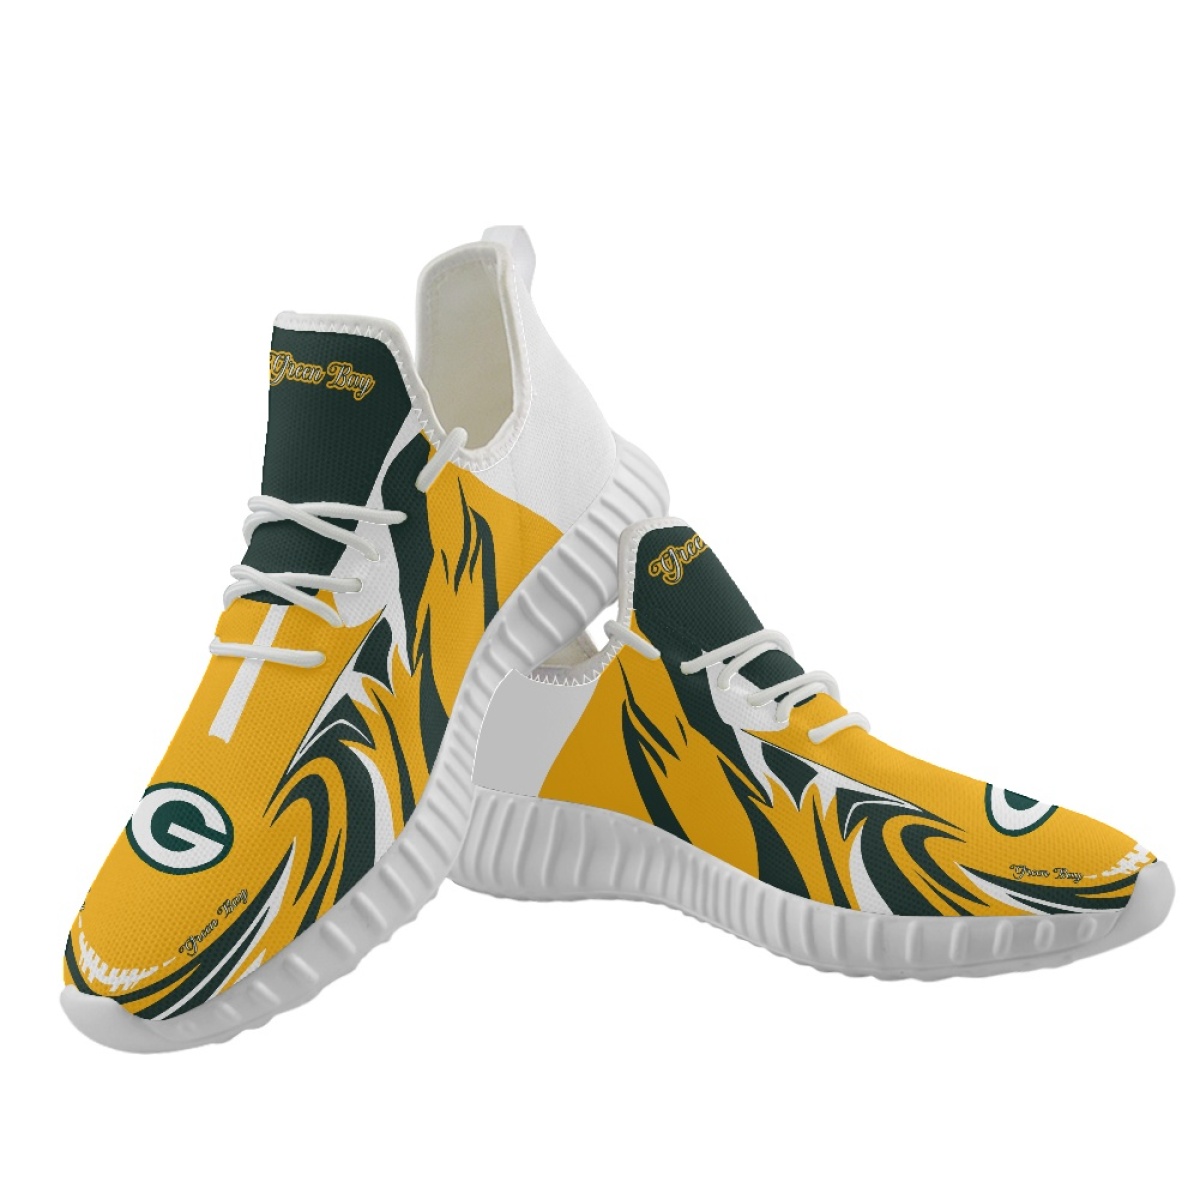 Men's Green Bay Packers Mesh Knit Sneakers/Shoes 016